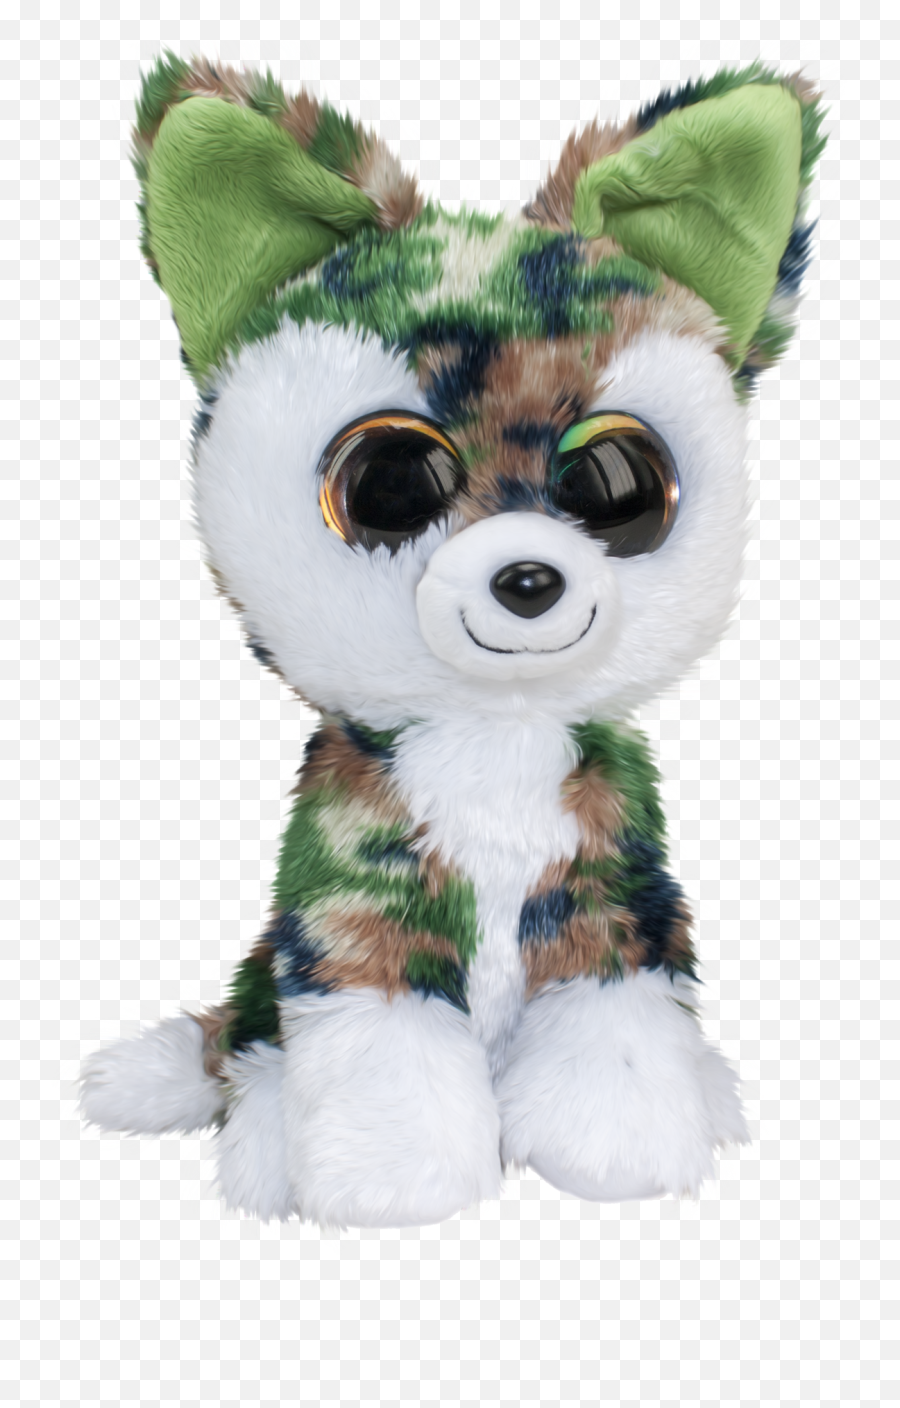 Lumo Big Wolf Woody Plush Stuffed Animal Doll - 9 Tall 5 Wide Camo Color Happy Huggable Friendly Kind And Cute Play With Your Buddy On The Png,How To Change Your Buddy Icon On Aim